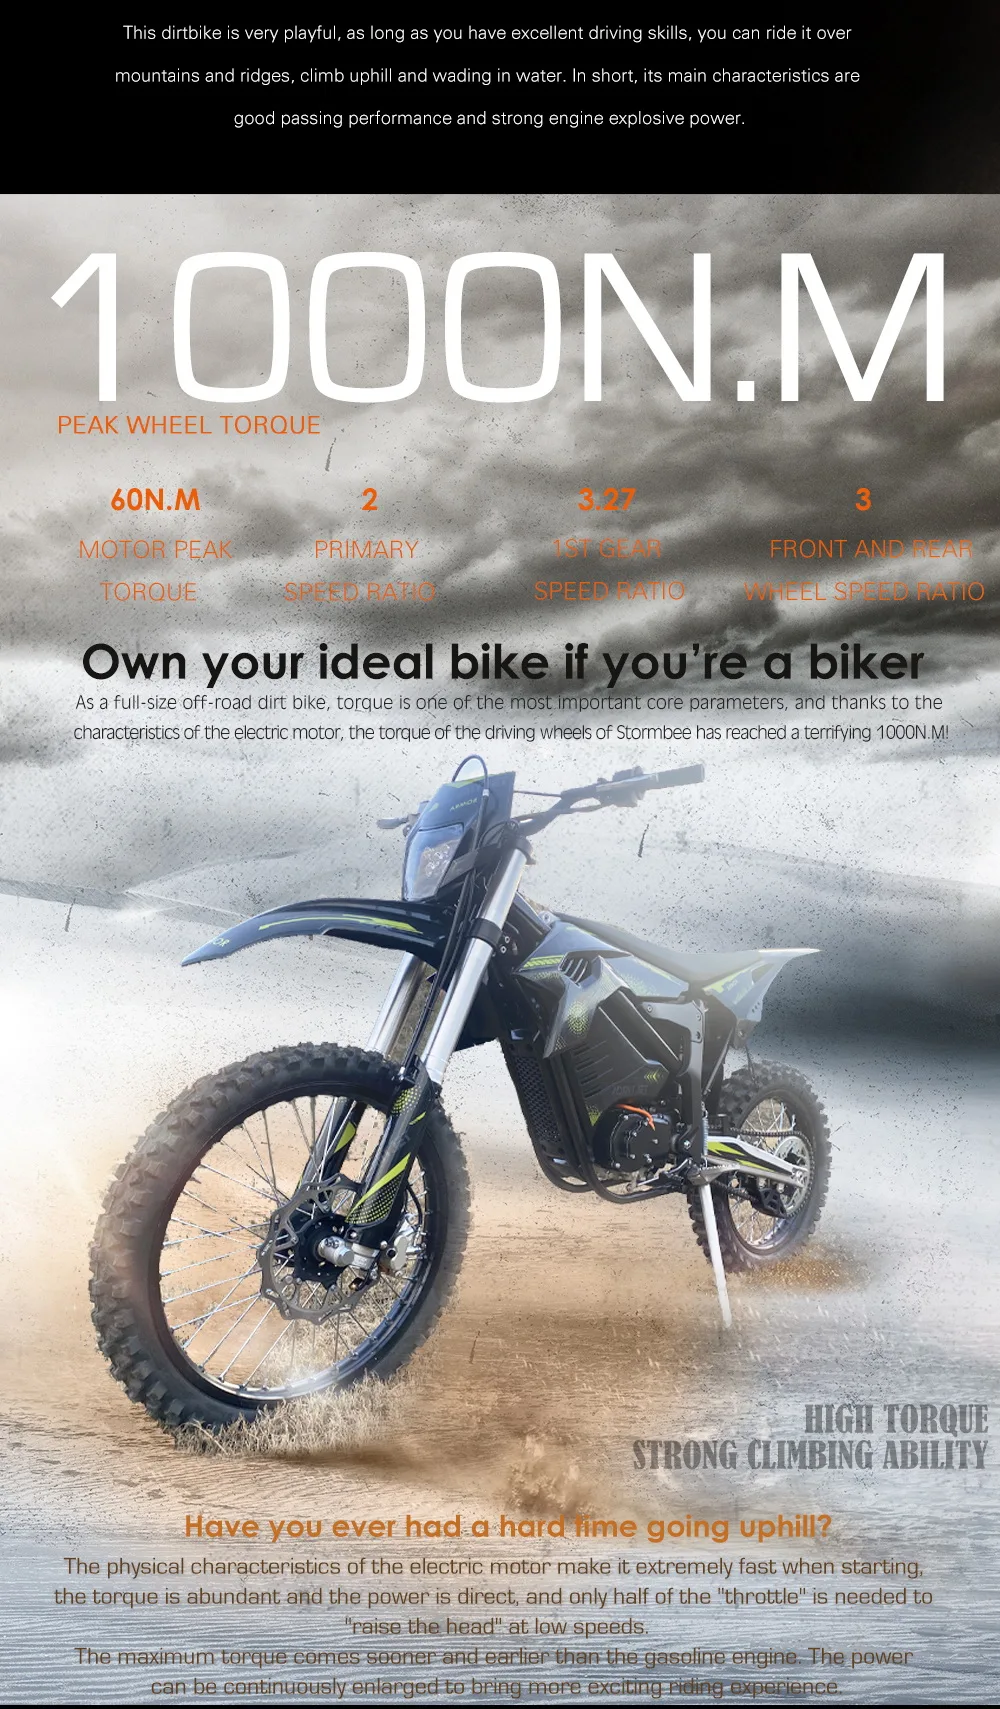 AdmitJet 20KW 85MPH Electric Dirt Bike For Adults